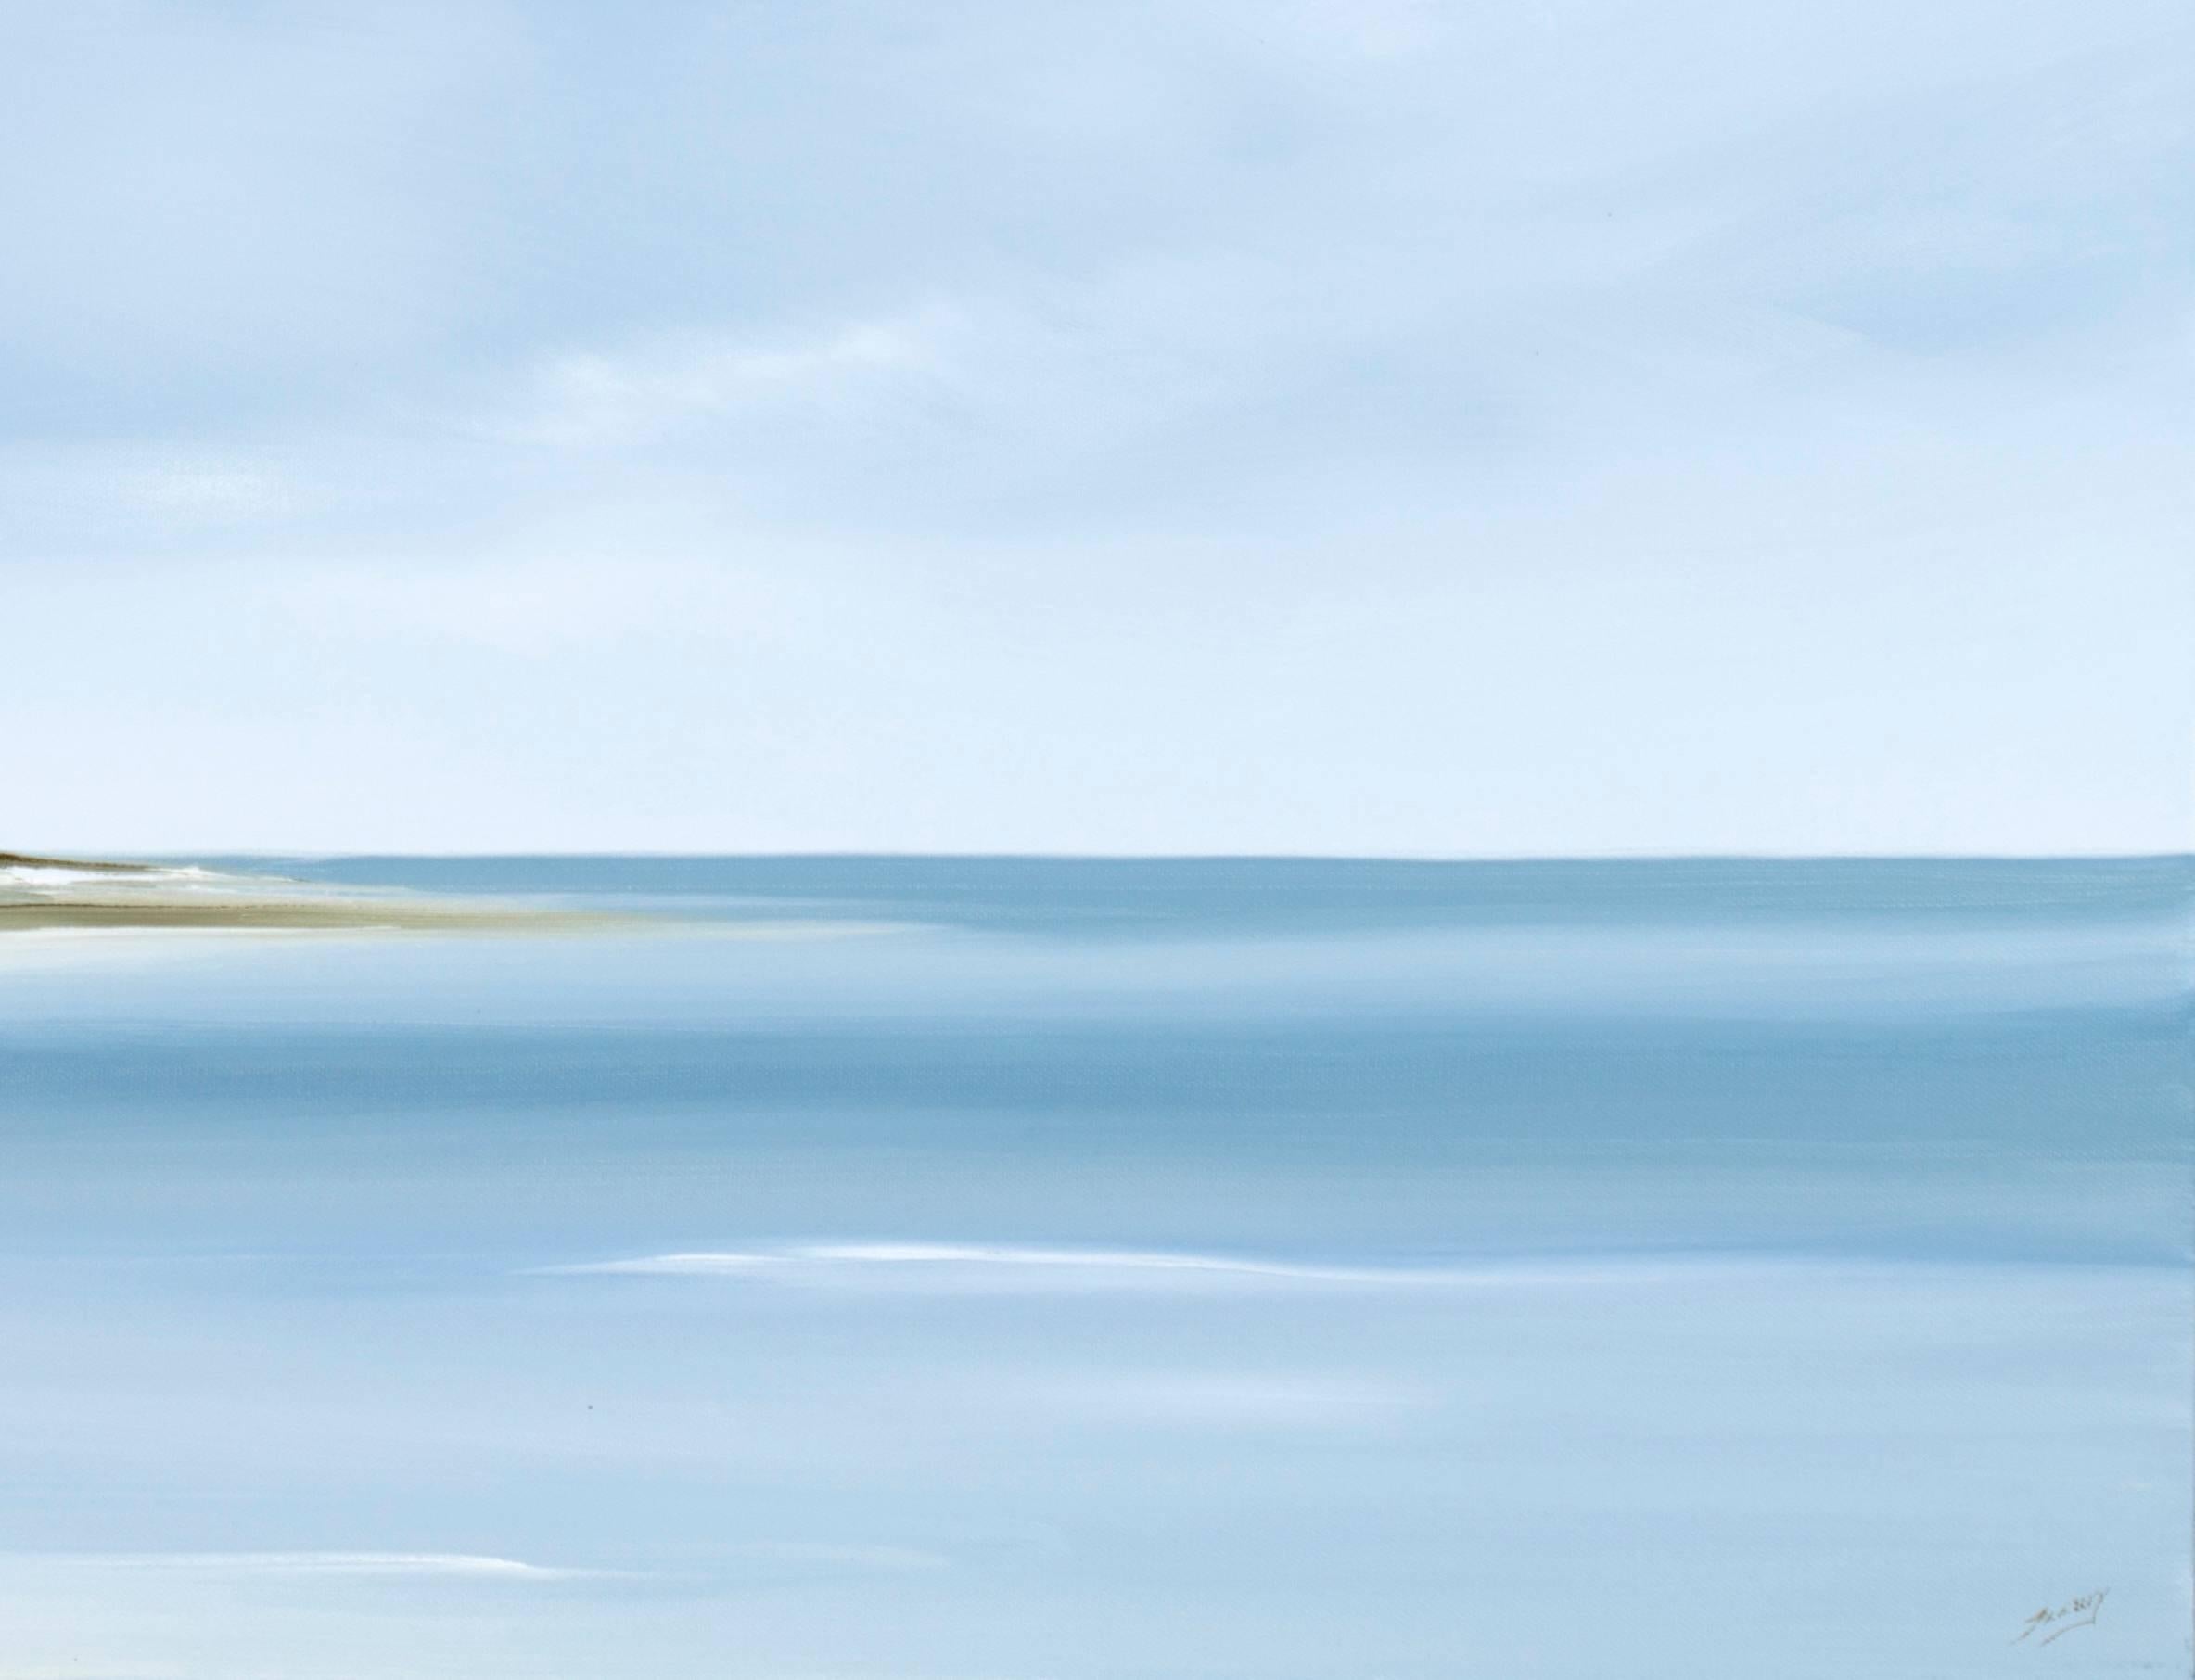 An original signed horizontal seascape landscape, oil painting on canvas, by renowned American artist Rick Fleury (1960-) titled Generation, 2017. A meditative landscape of minimalist style. Calming big blue sky and white wispy clouds; soft tan